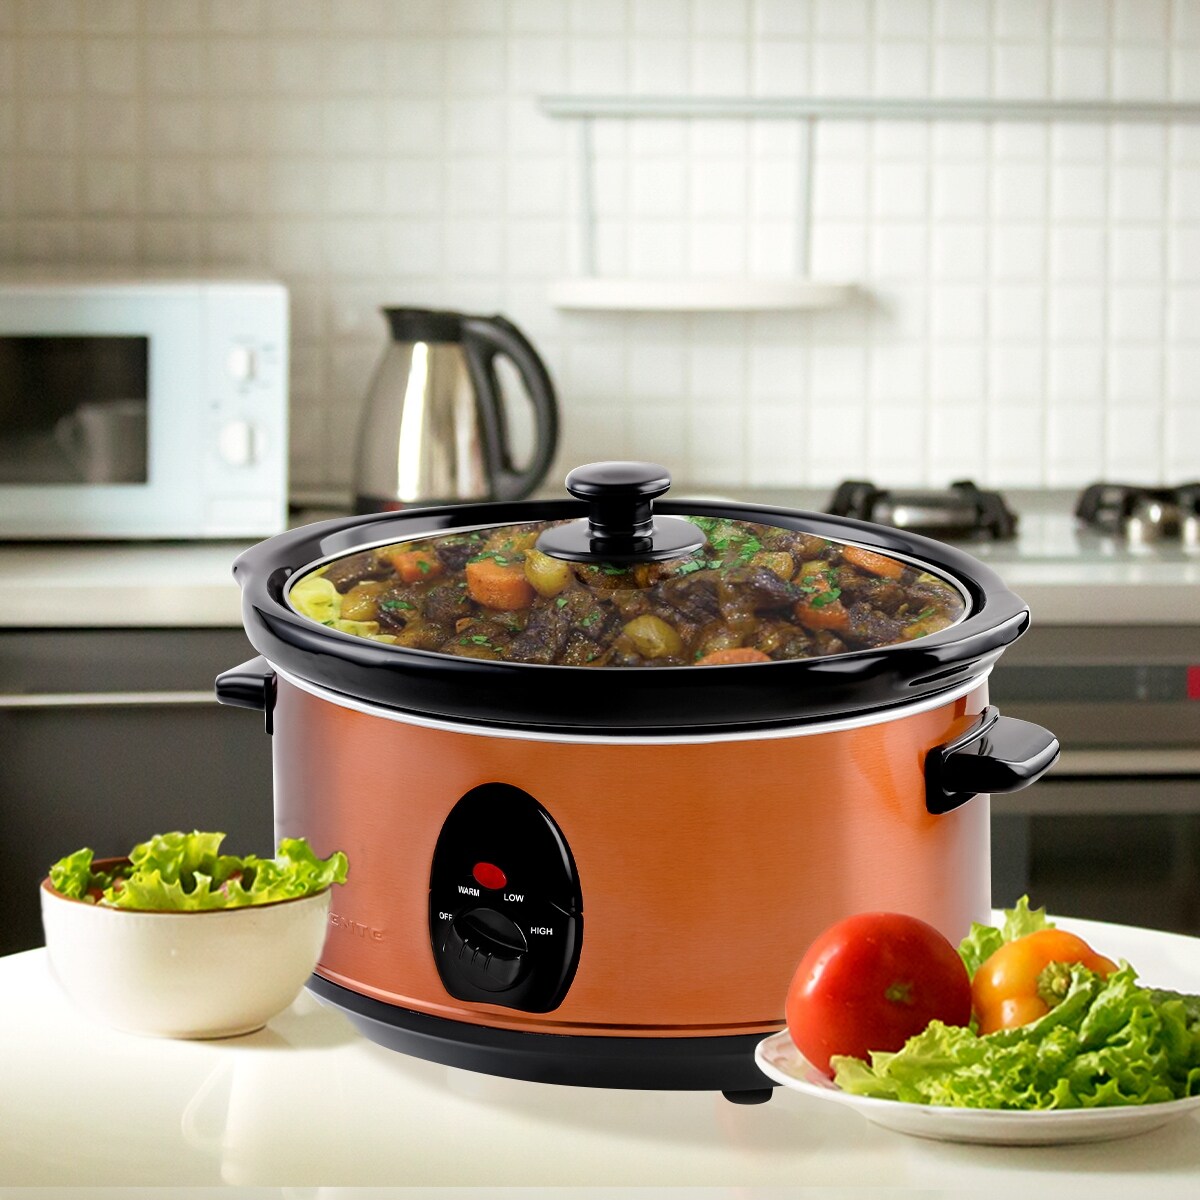 Realtree 5 Qt Slow Cooker with Lid Latch Strap - Bed Bath & Beyond